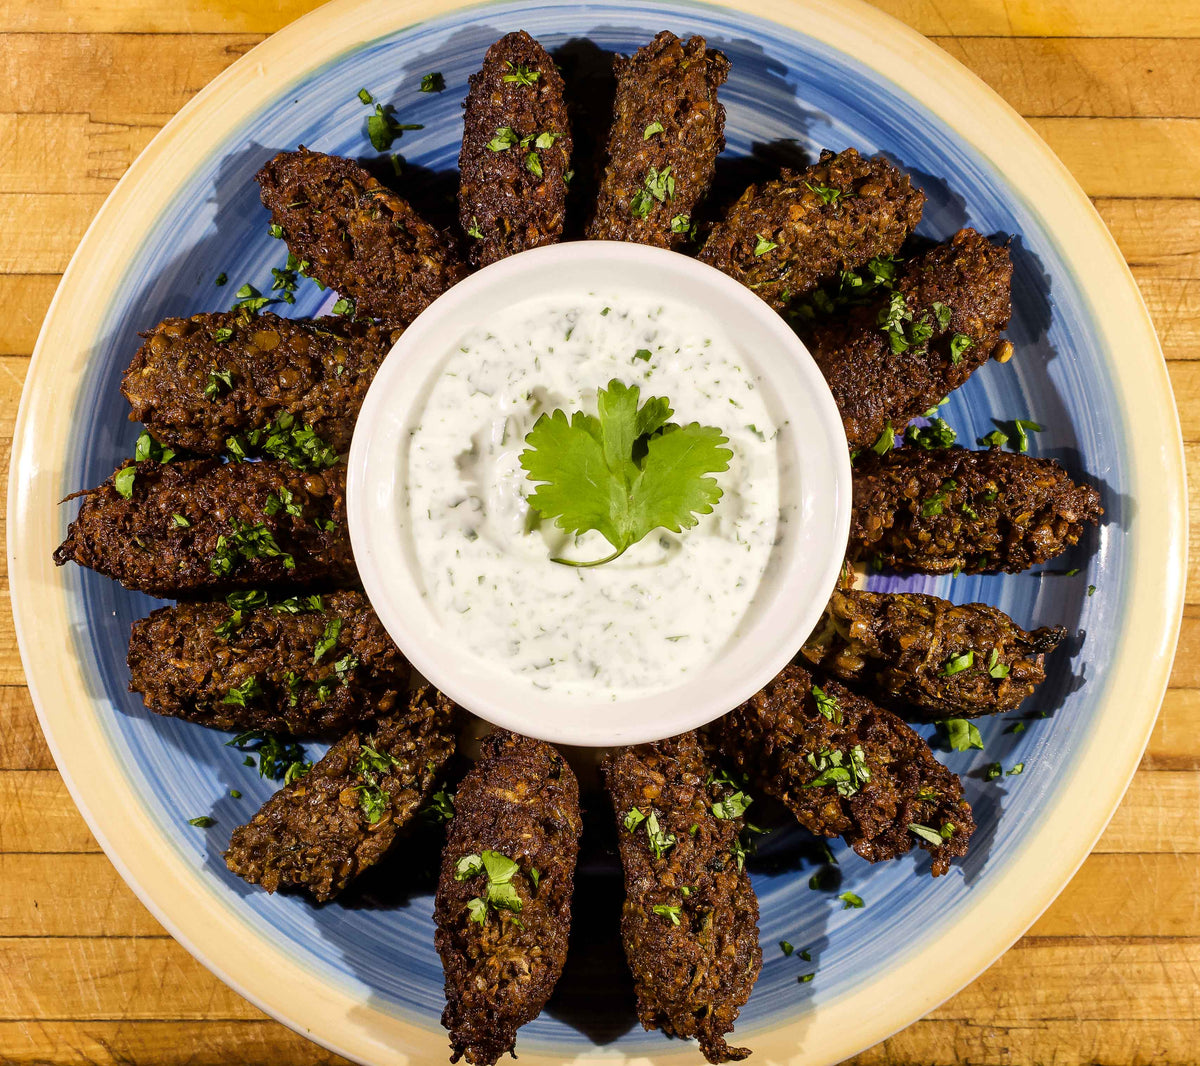 Spiced Zucchini and Lentil Fritters with Lime-Cilantro Yogurt